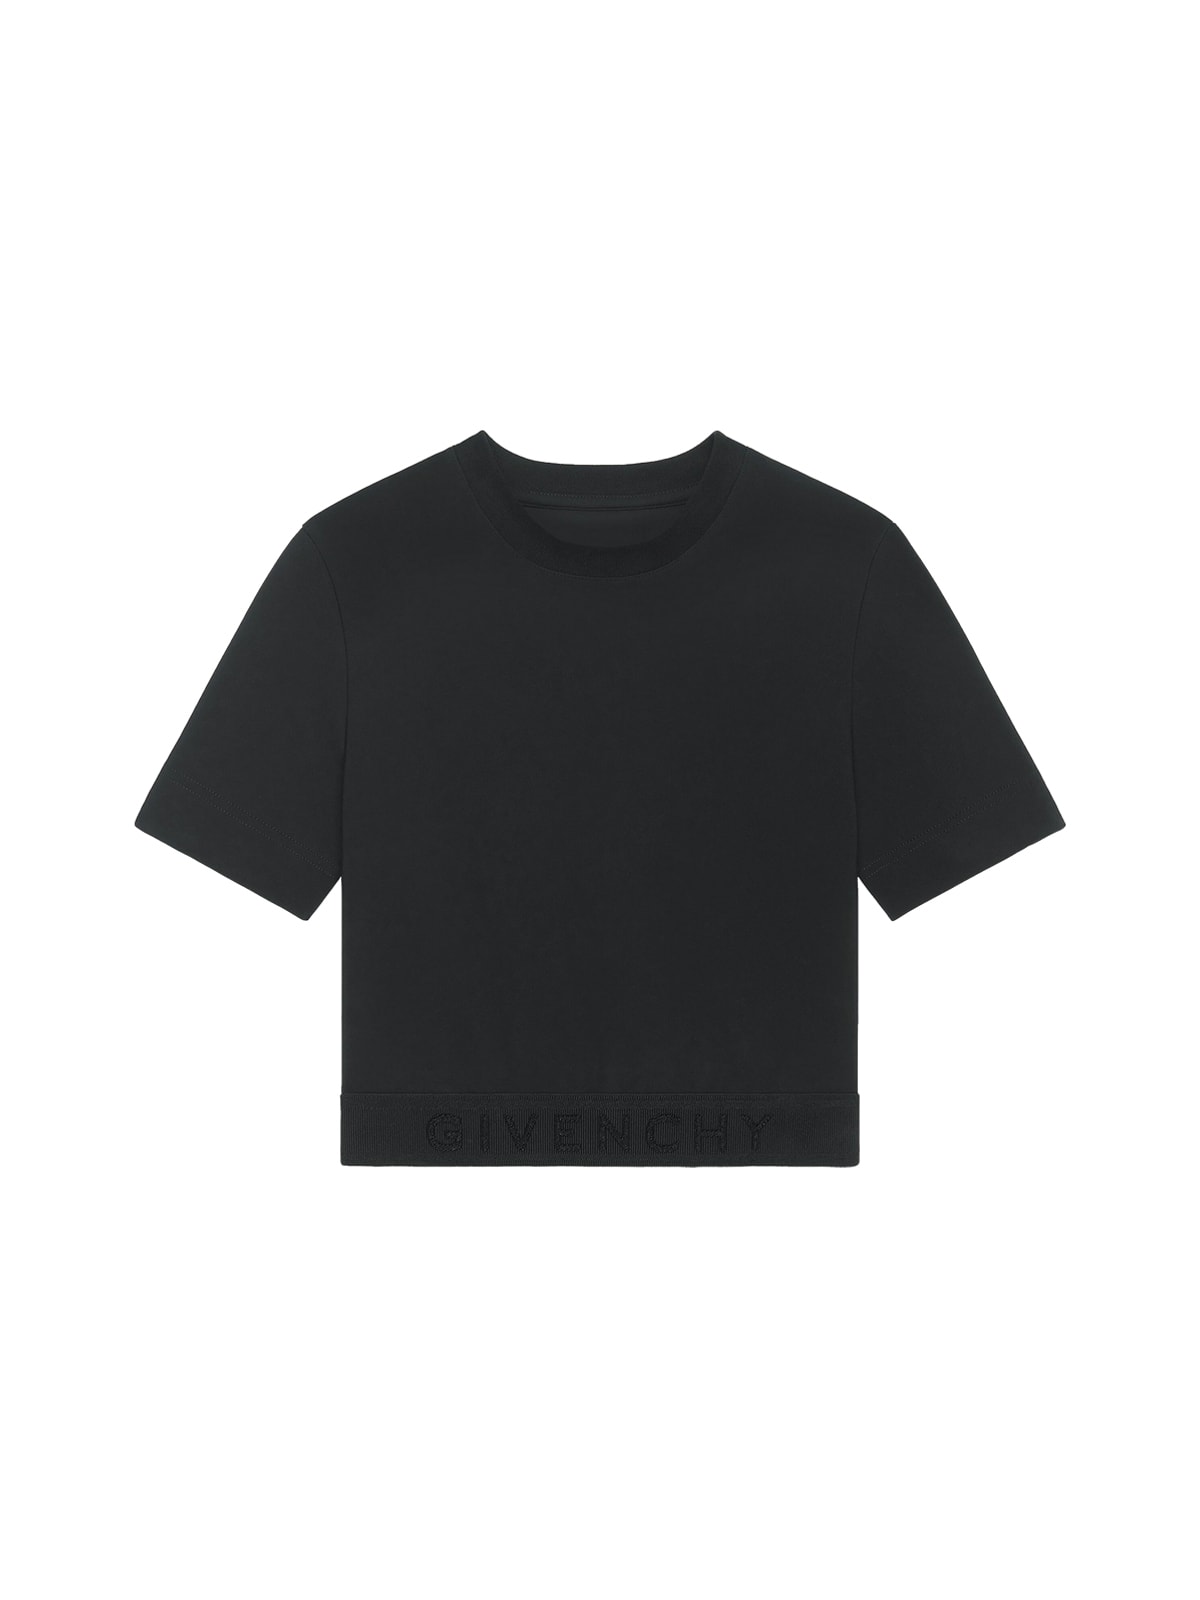 Givenchy Cropped Top W/ Elastic Jacquard In Black